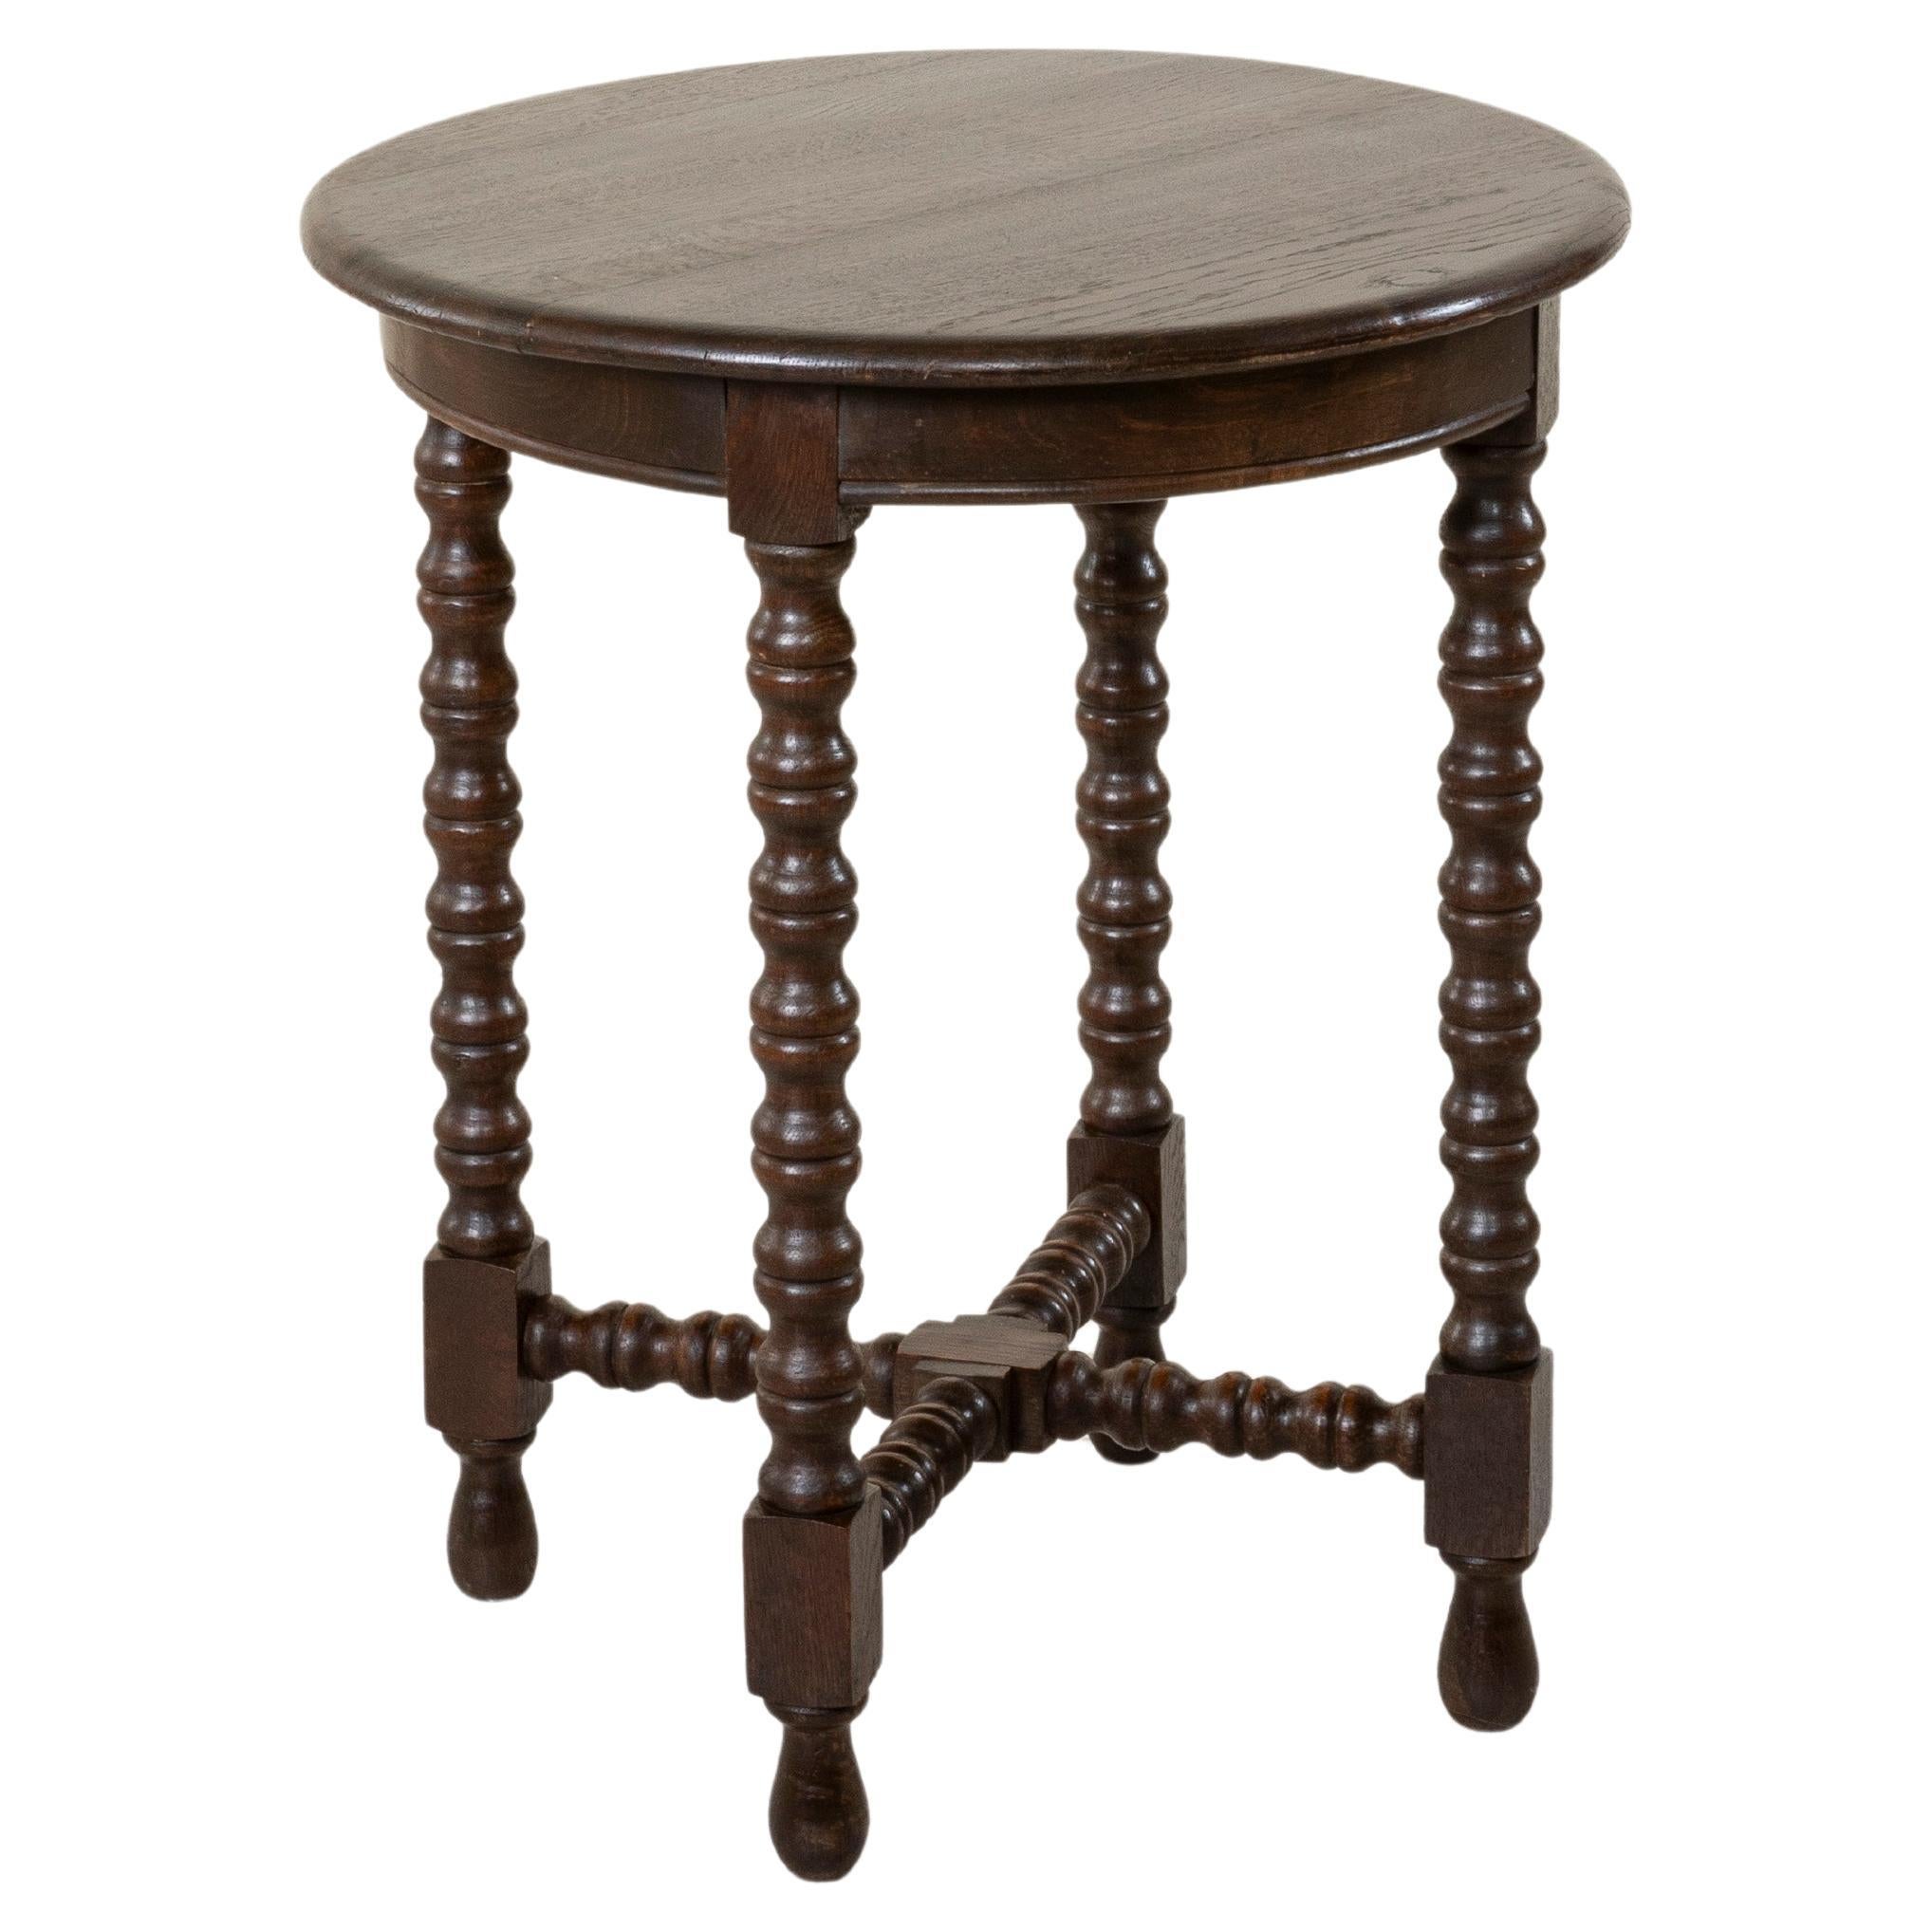 French Oak Side Table or End Table with Turned Legs, C. 1900